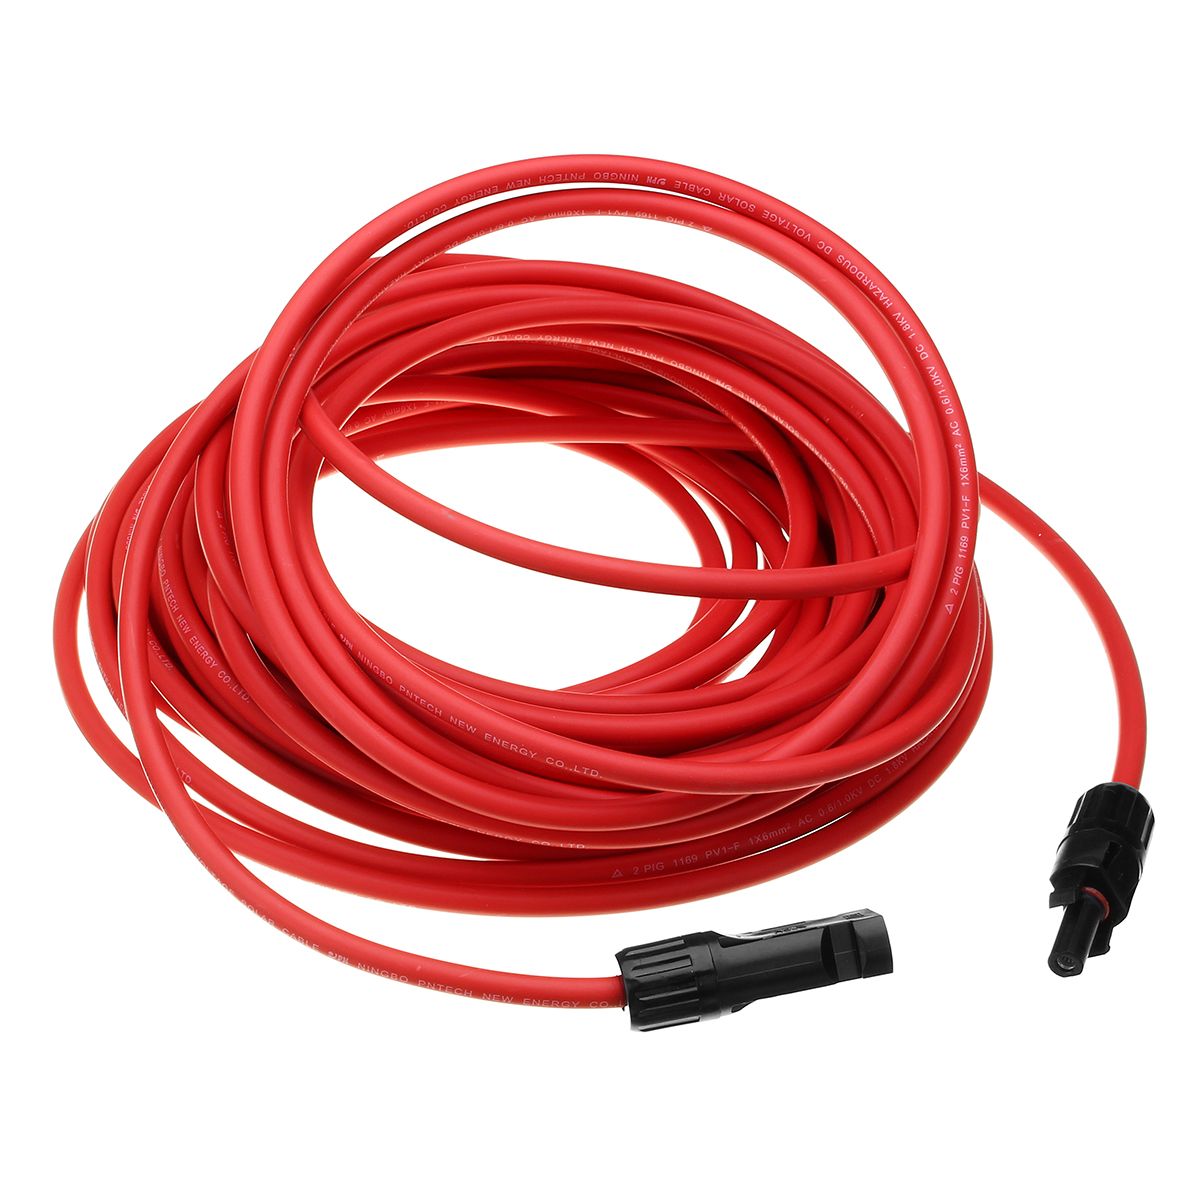 10-AWG-15-Meter-Solar-Panel-Extension-Cable-Wire-BlackRed-with-MC4-Connectors-1338753